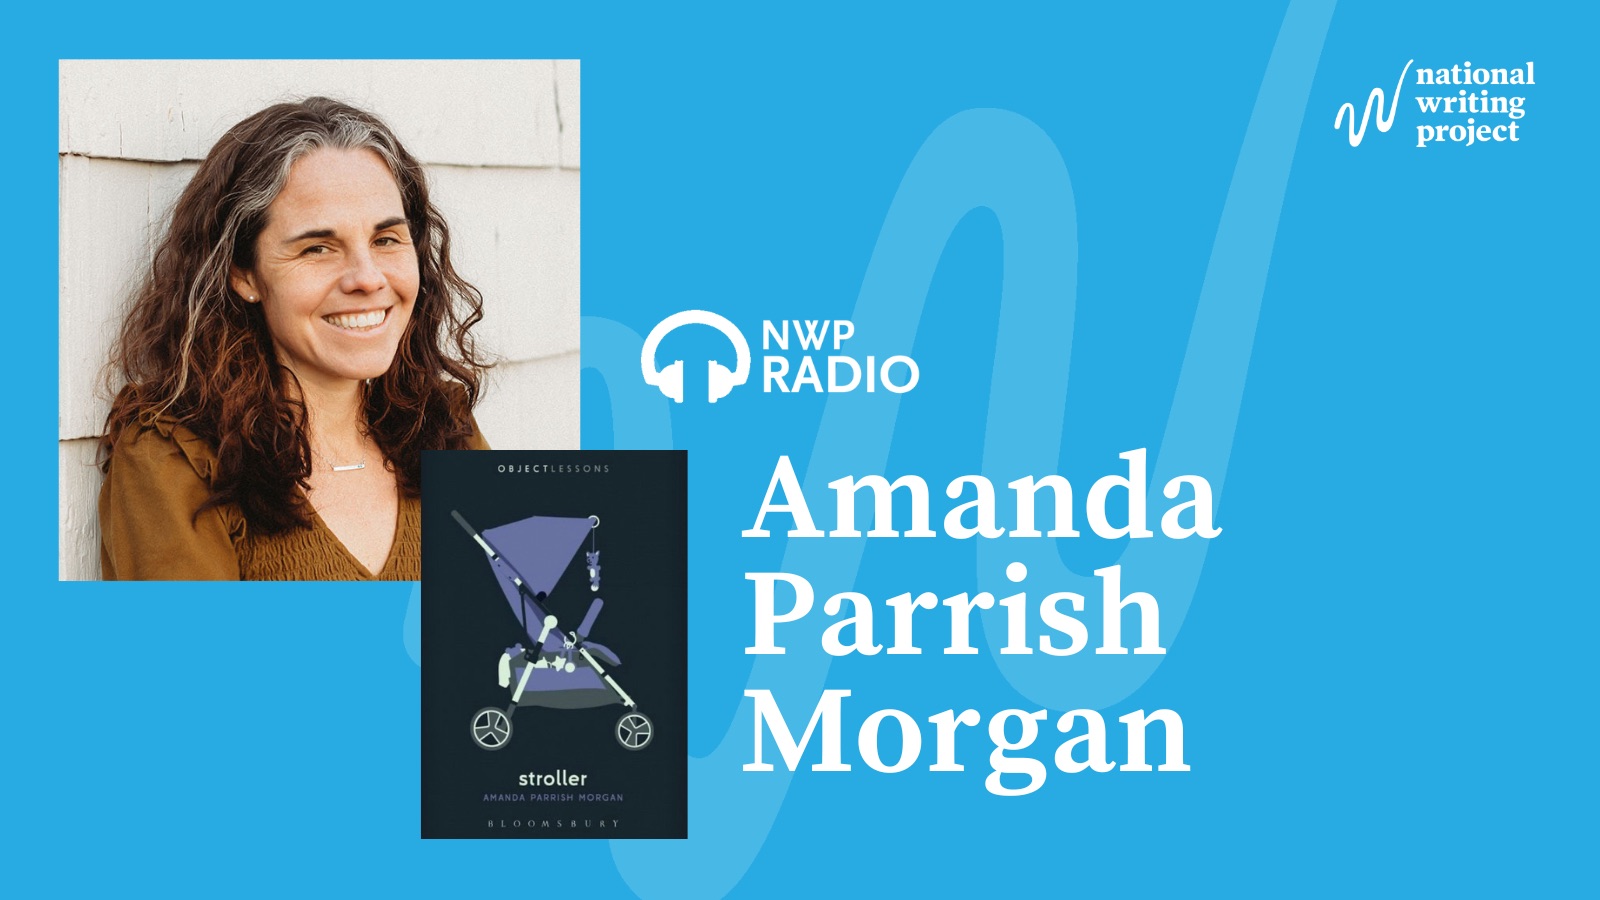 Author photo of Amanda Parrish Morgan with Strollers book cover on blue background.